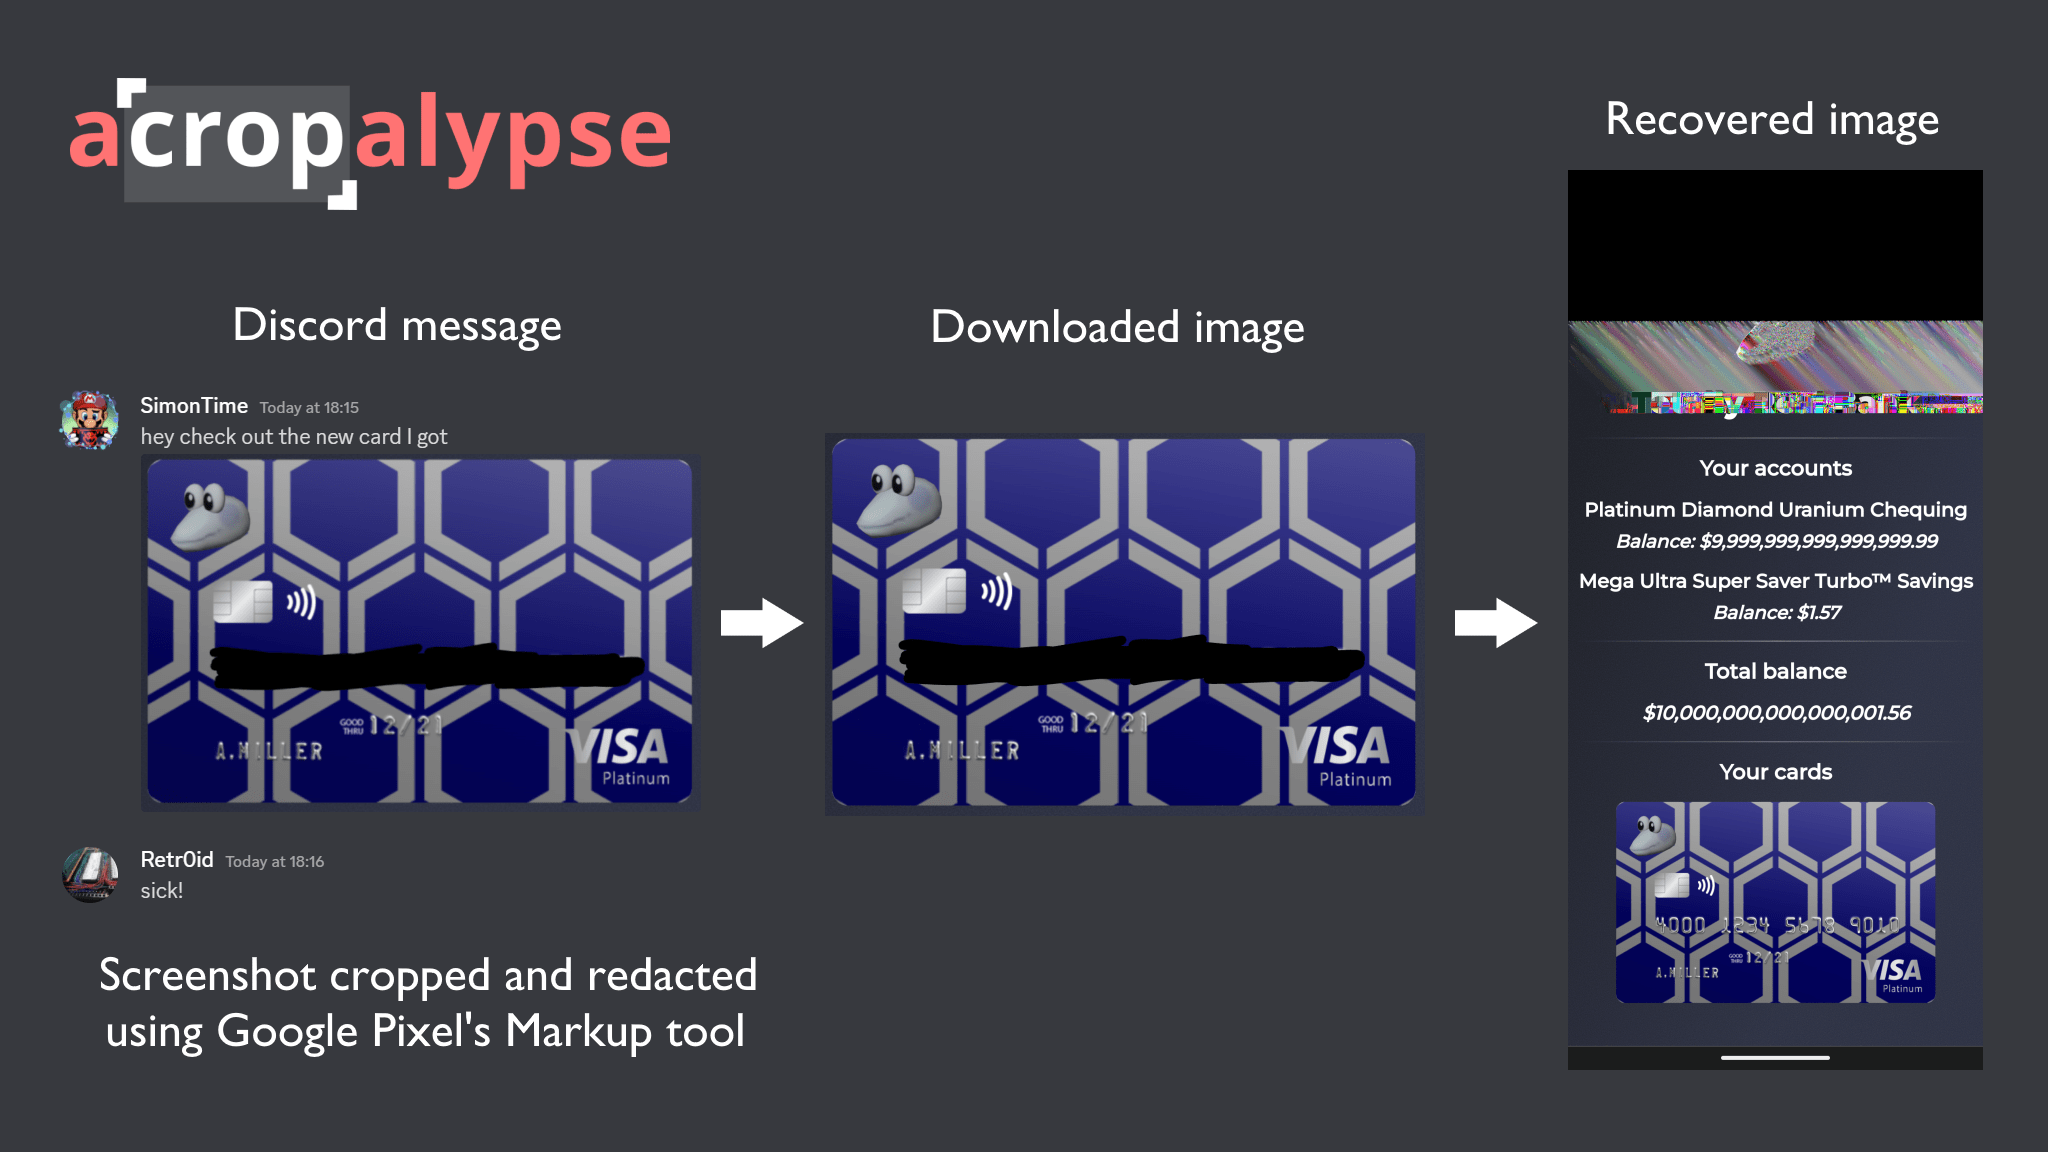 Illustration of the concept behind the Acropalypse vulnerability